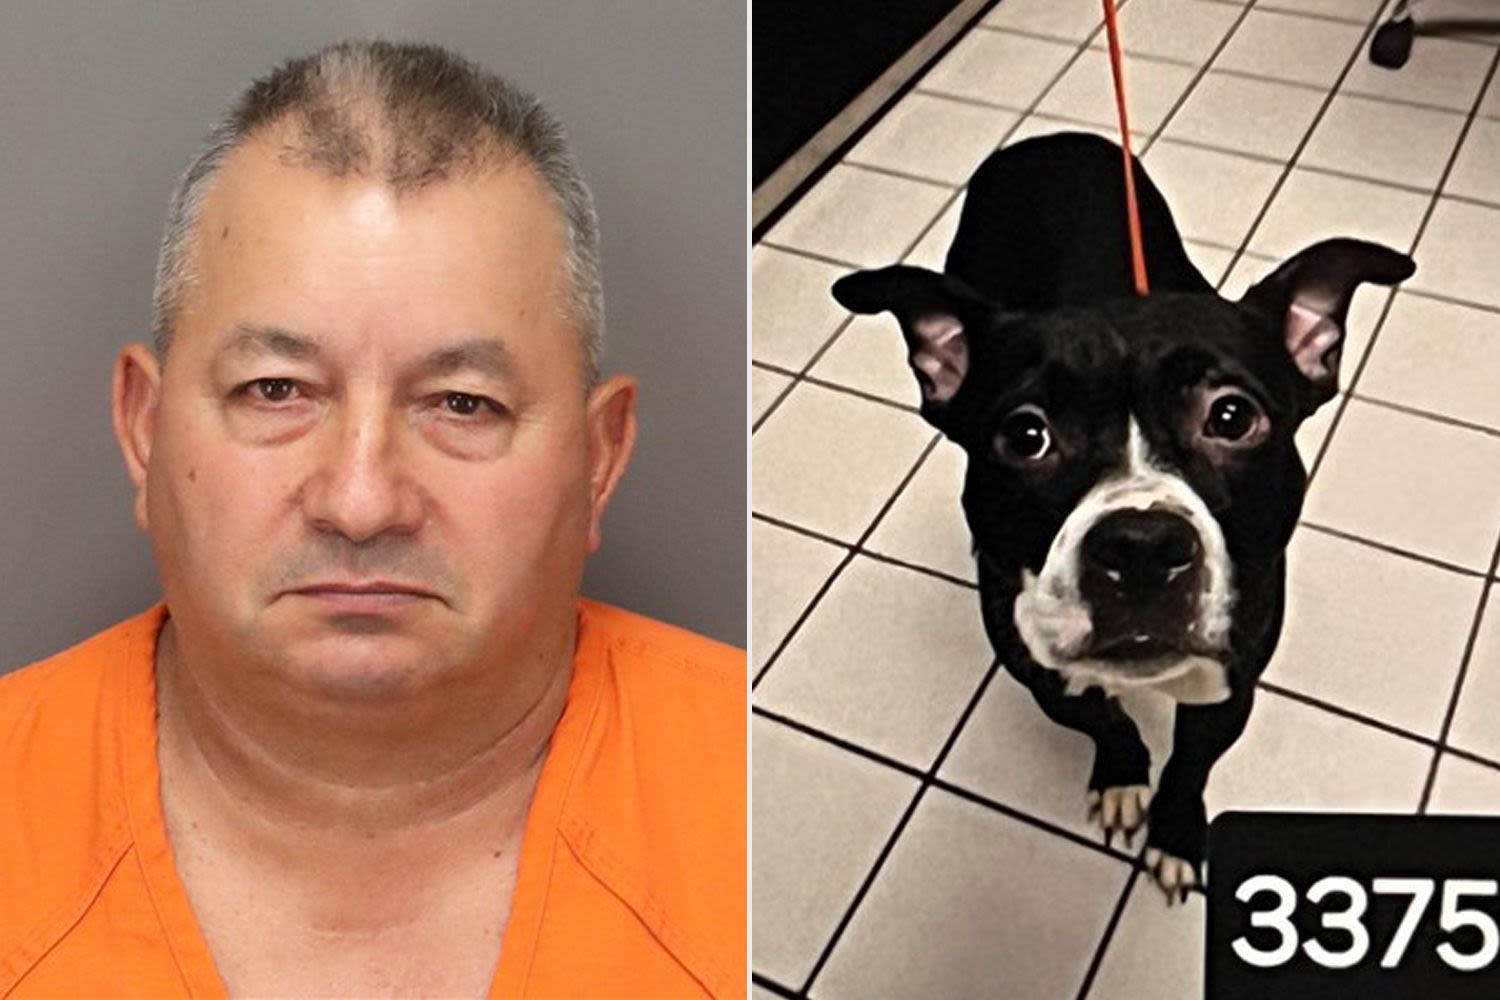 Fla. Man Accused of Adopting Dog from Shelter, Decapitating Animal the Next Day